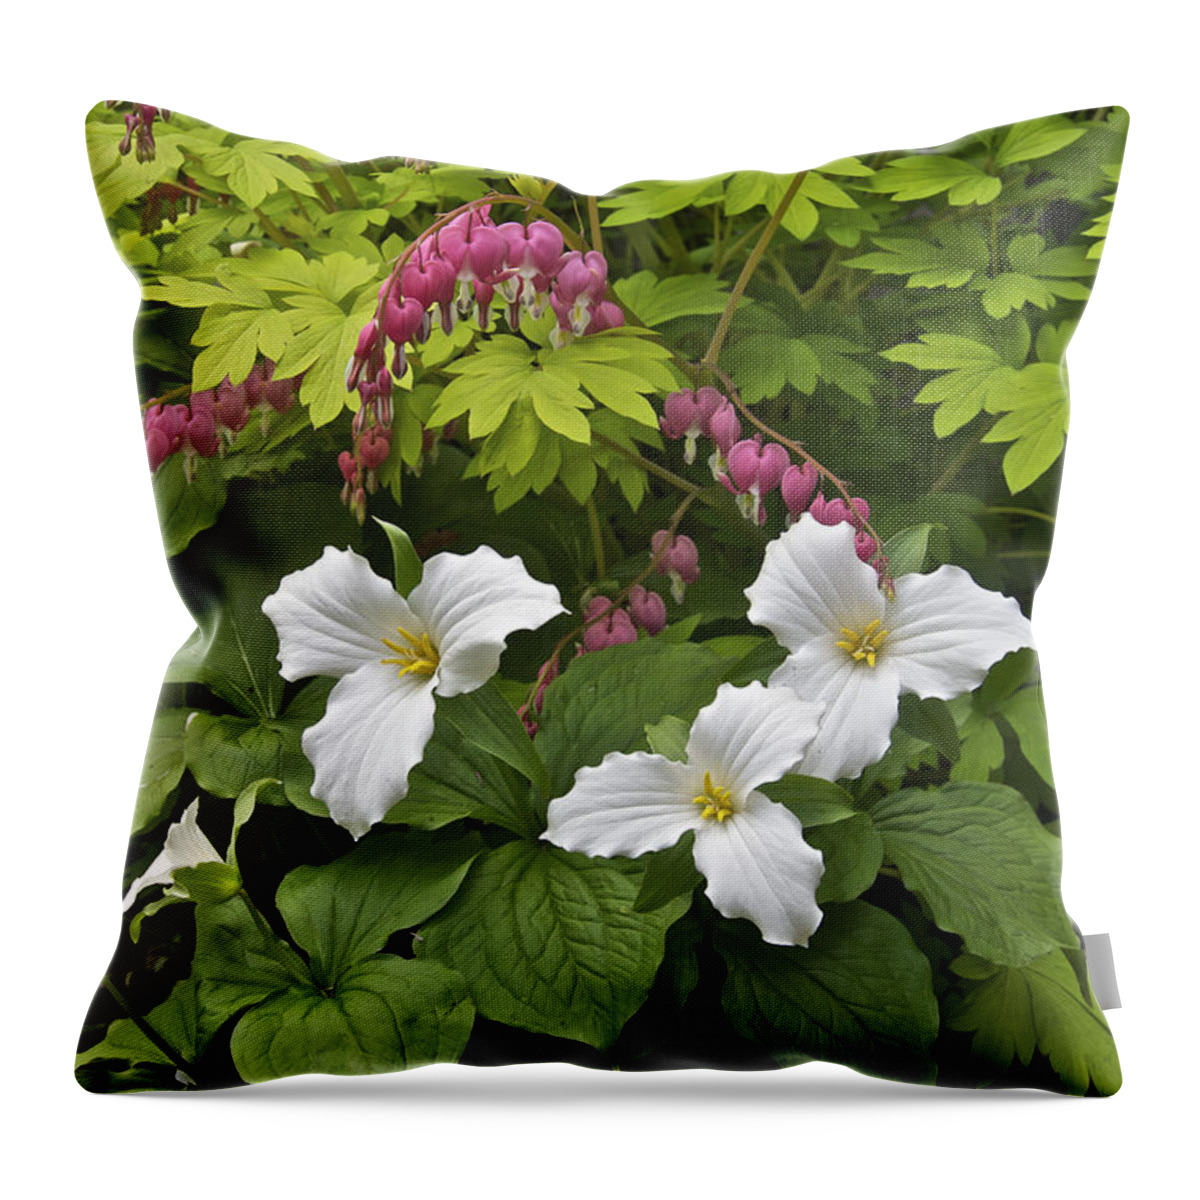 Trillium Throw Pillow featuring the photograph Trillium And Bleeding Hearts1079 by Michael Peychich